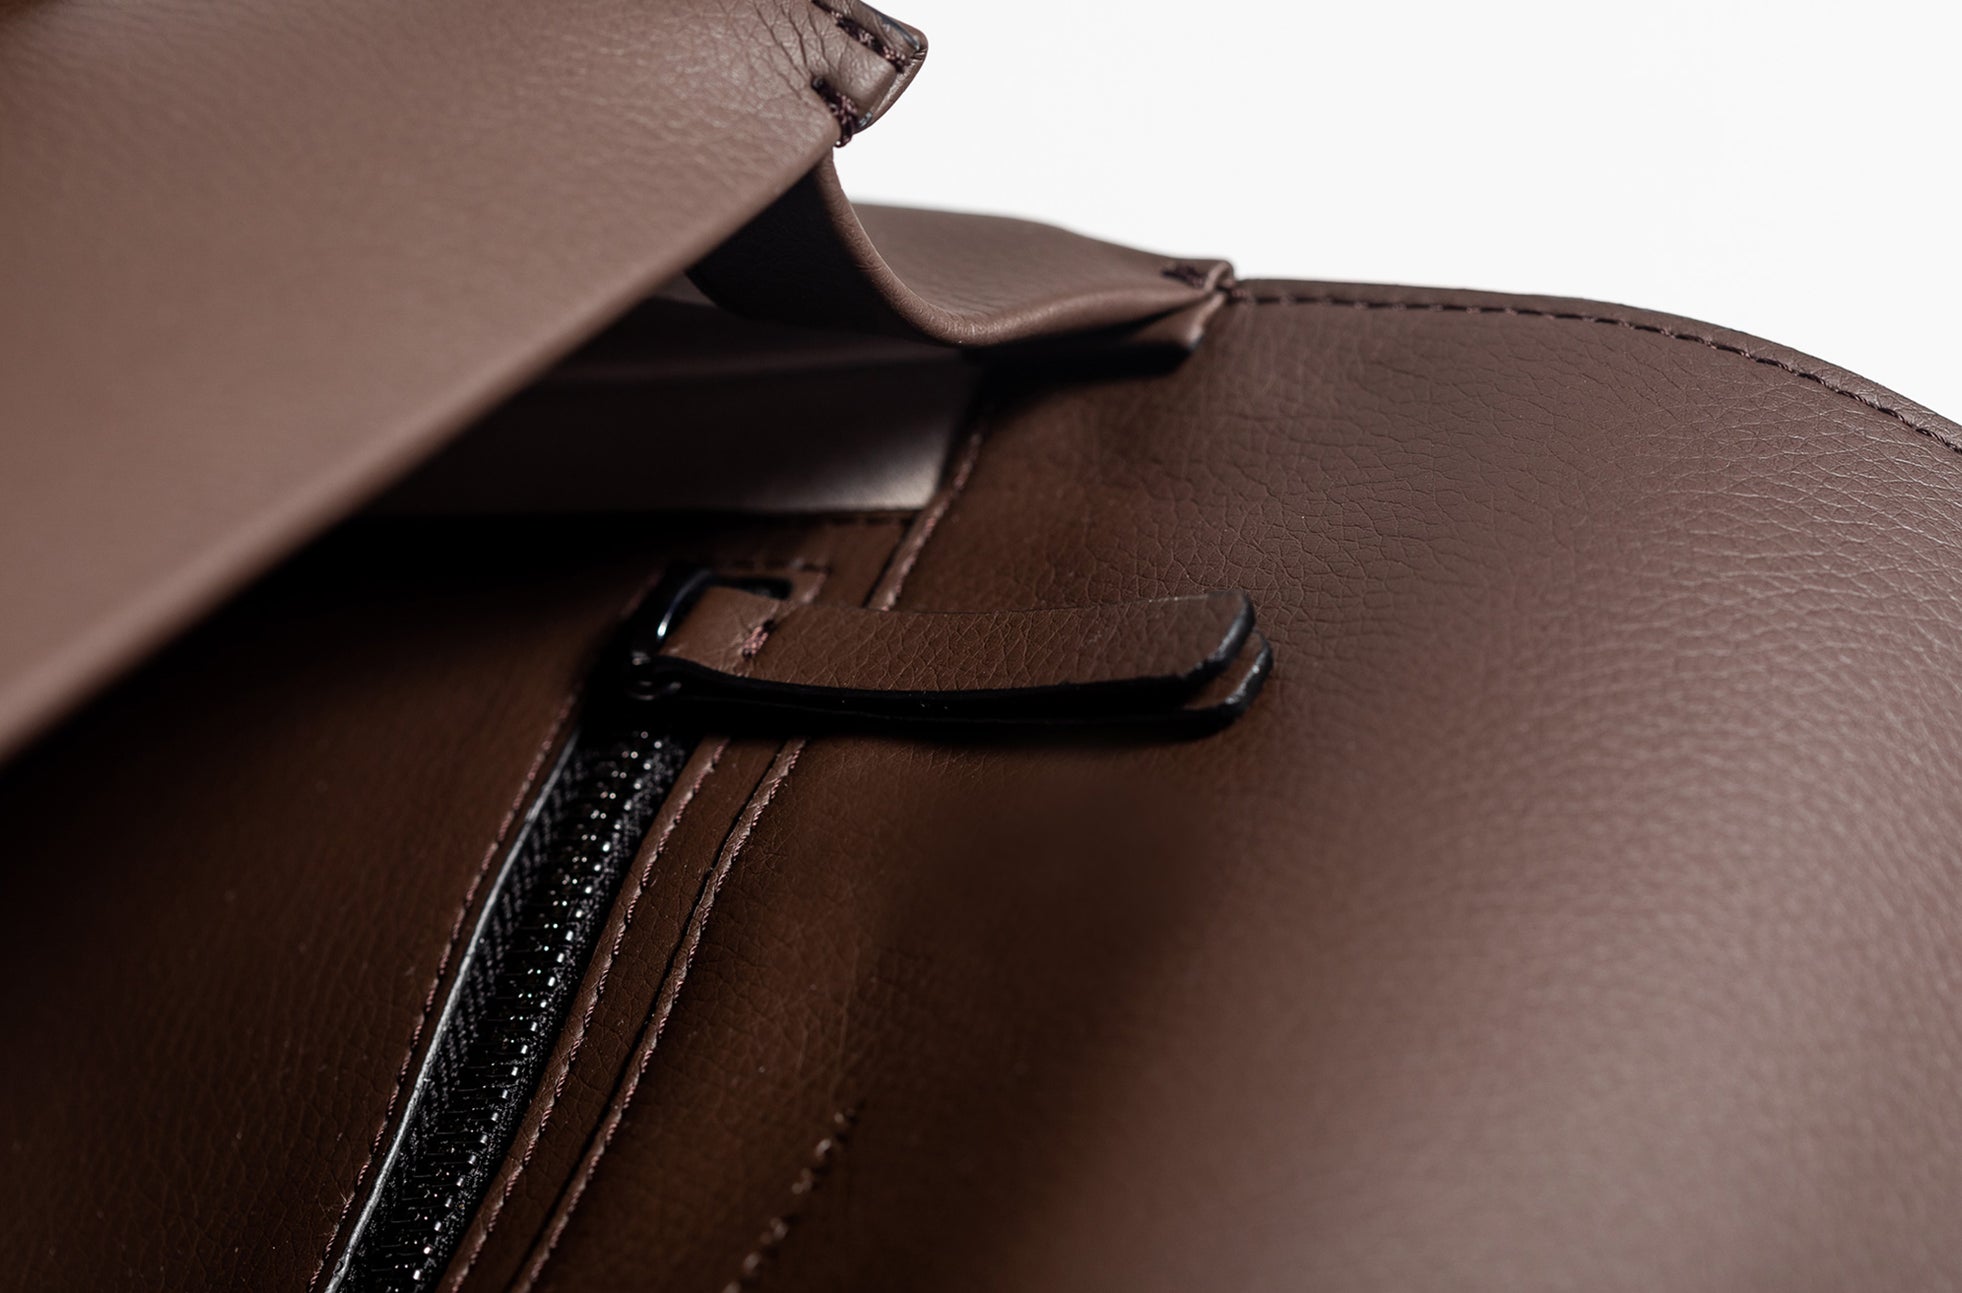 The Small Backpack in Technik-Leather in Taupe image 7